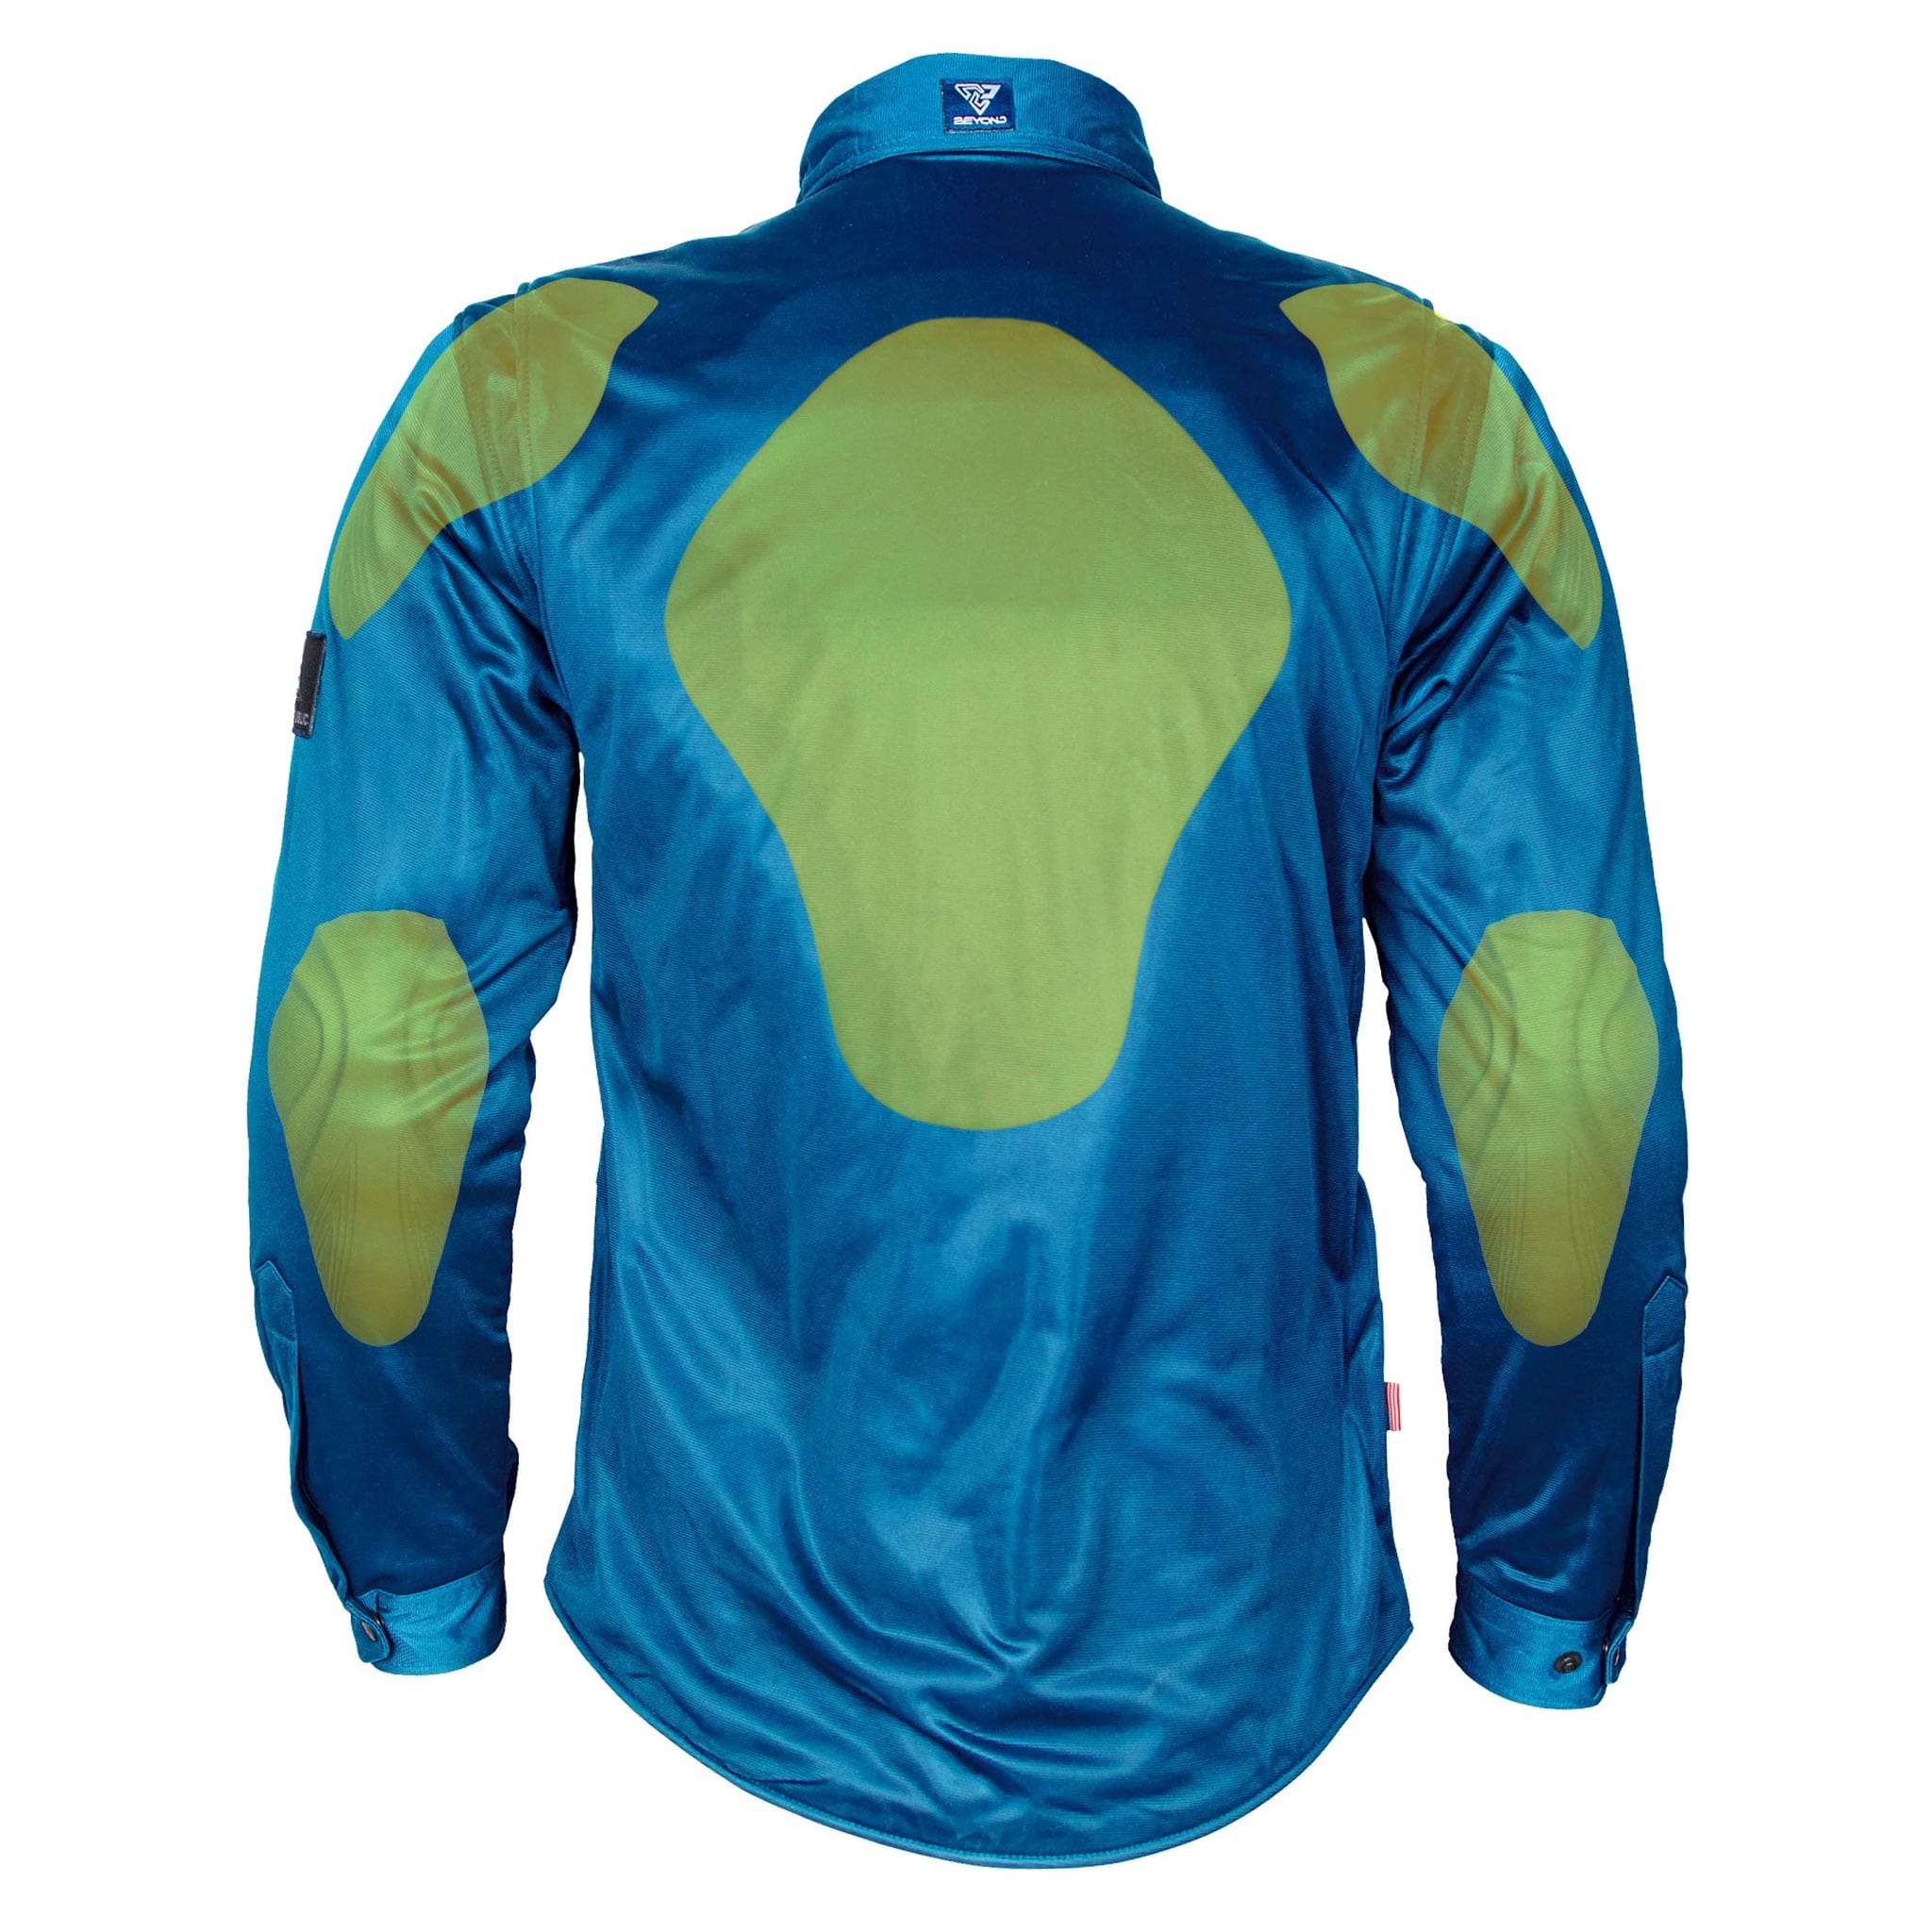 Ultra Protective Shirt - Teal Solid